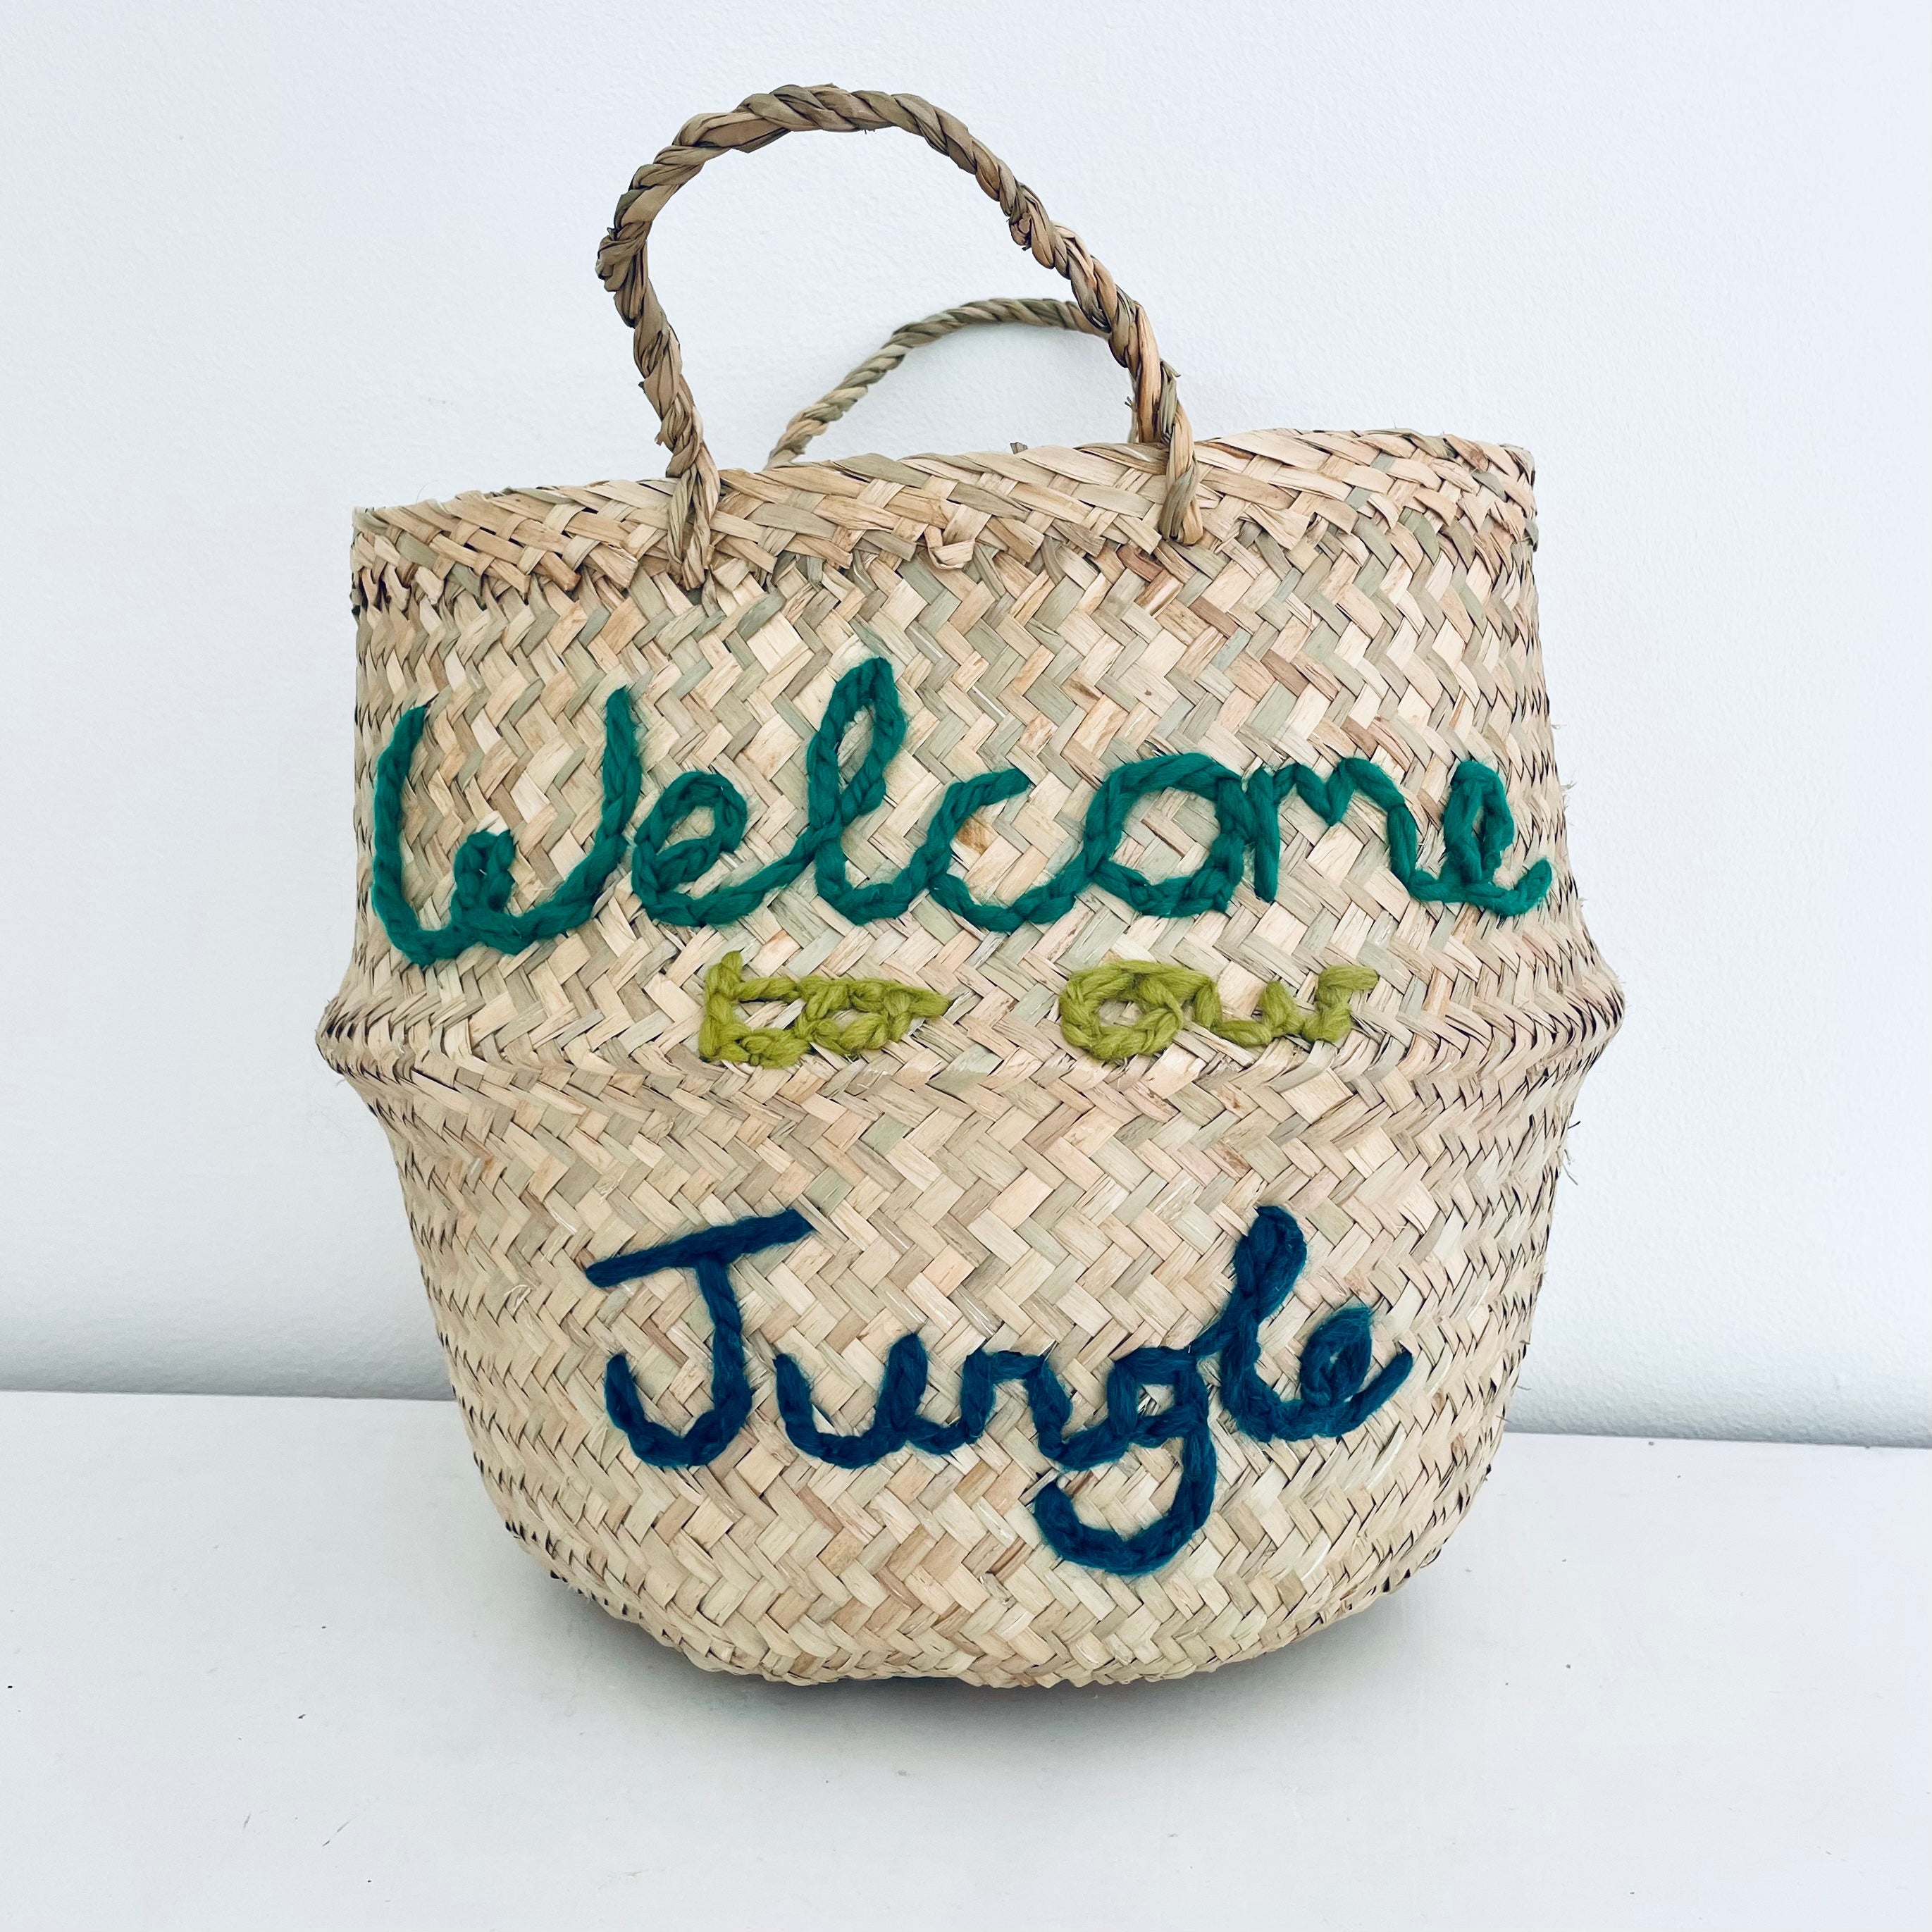 Bellybambino Welcome to Our Jungle Basket - Large